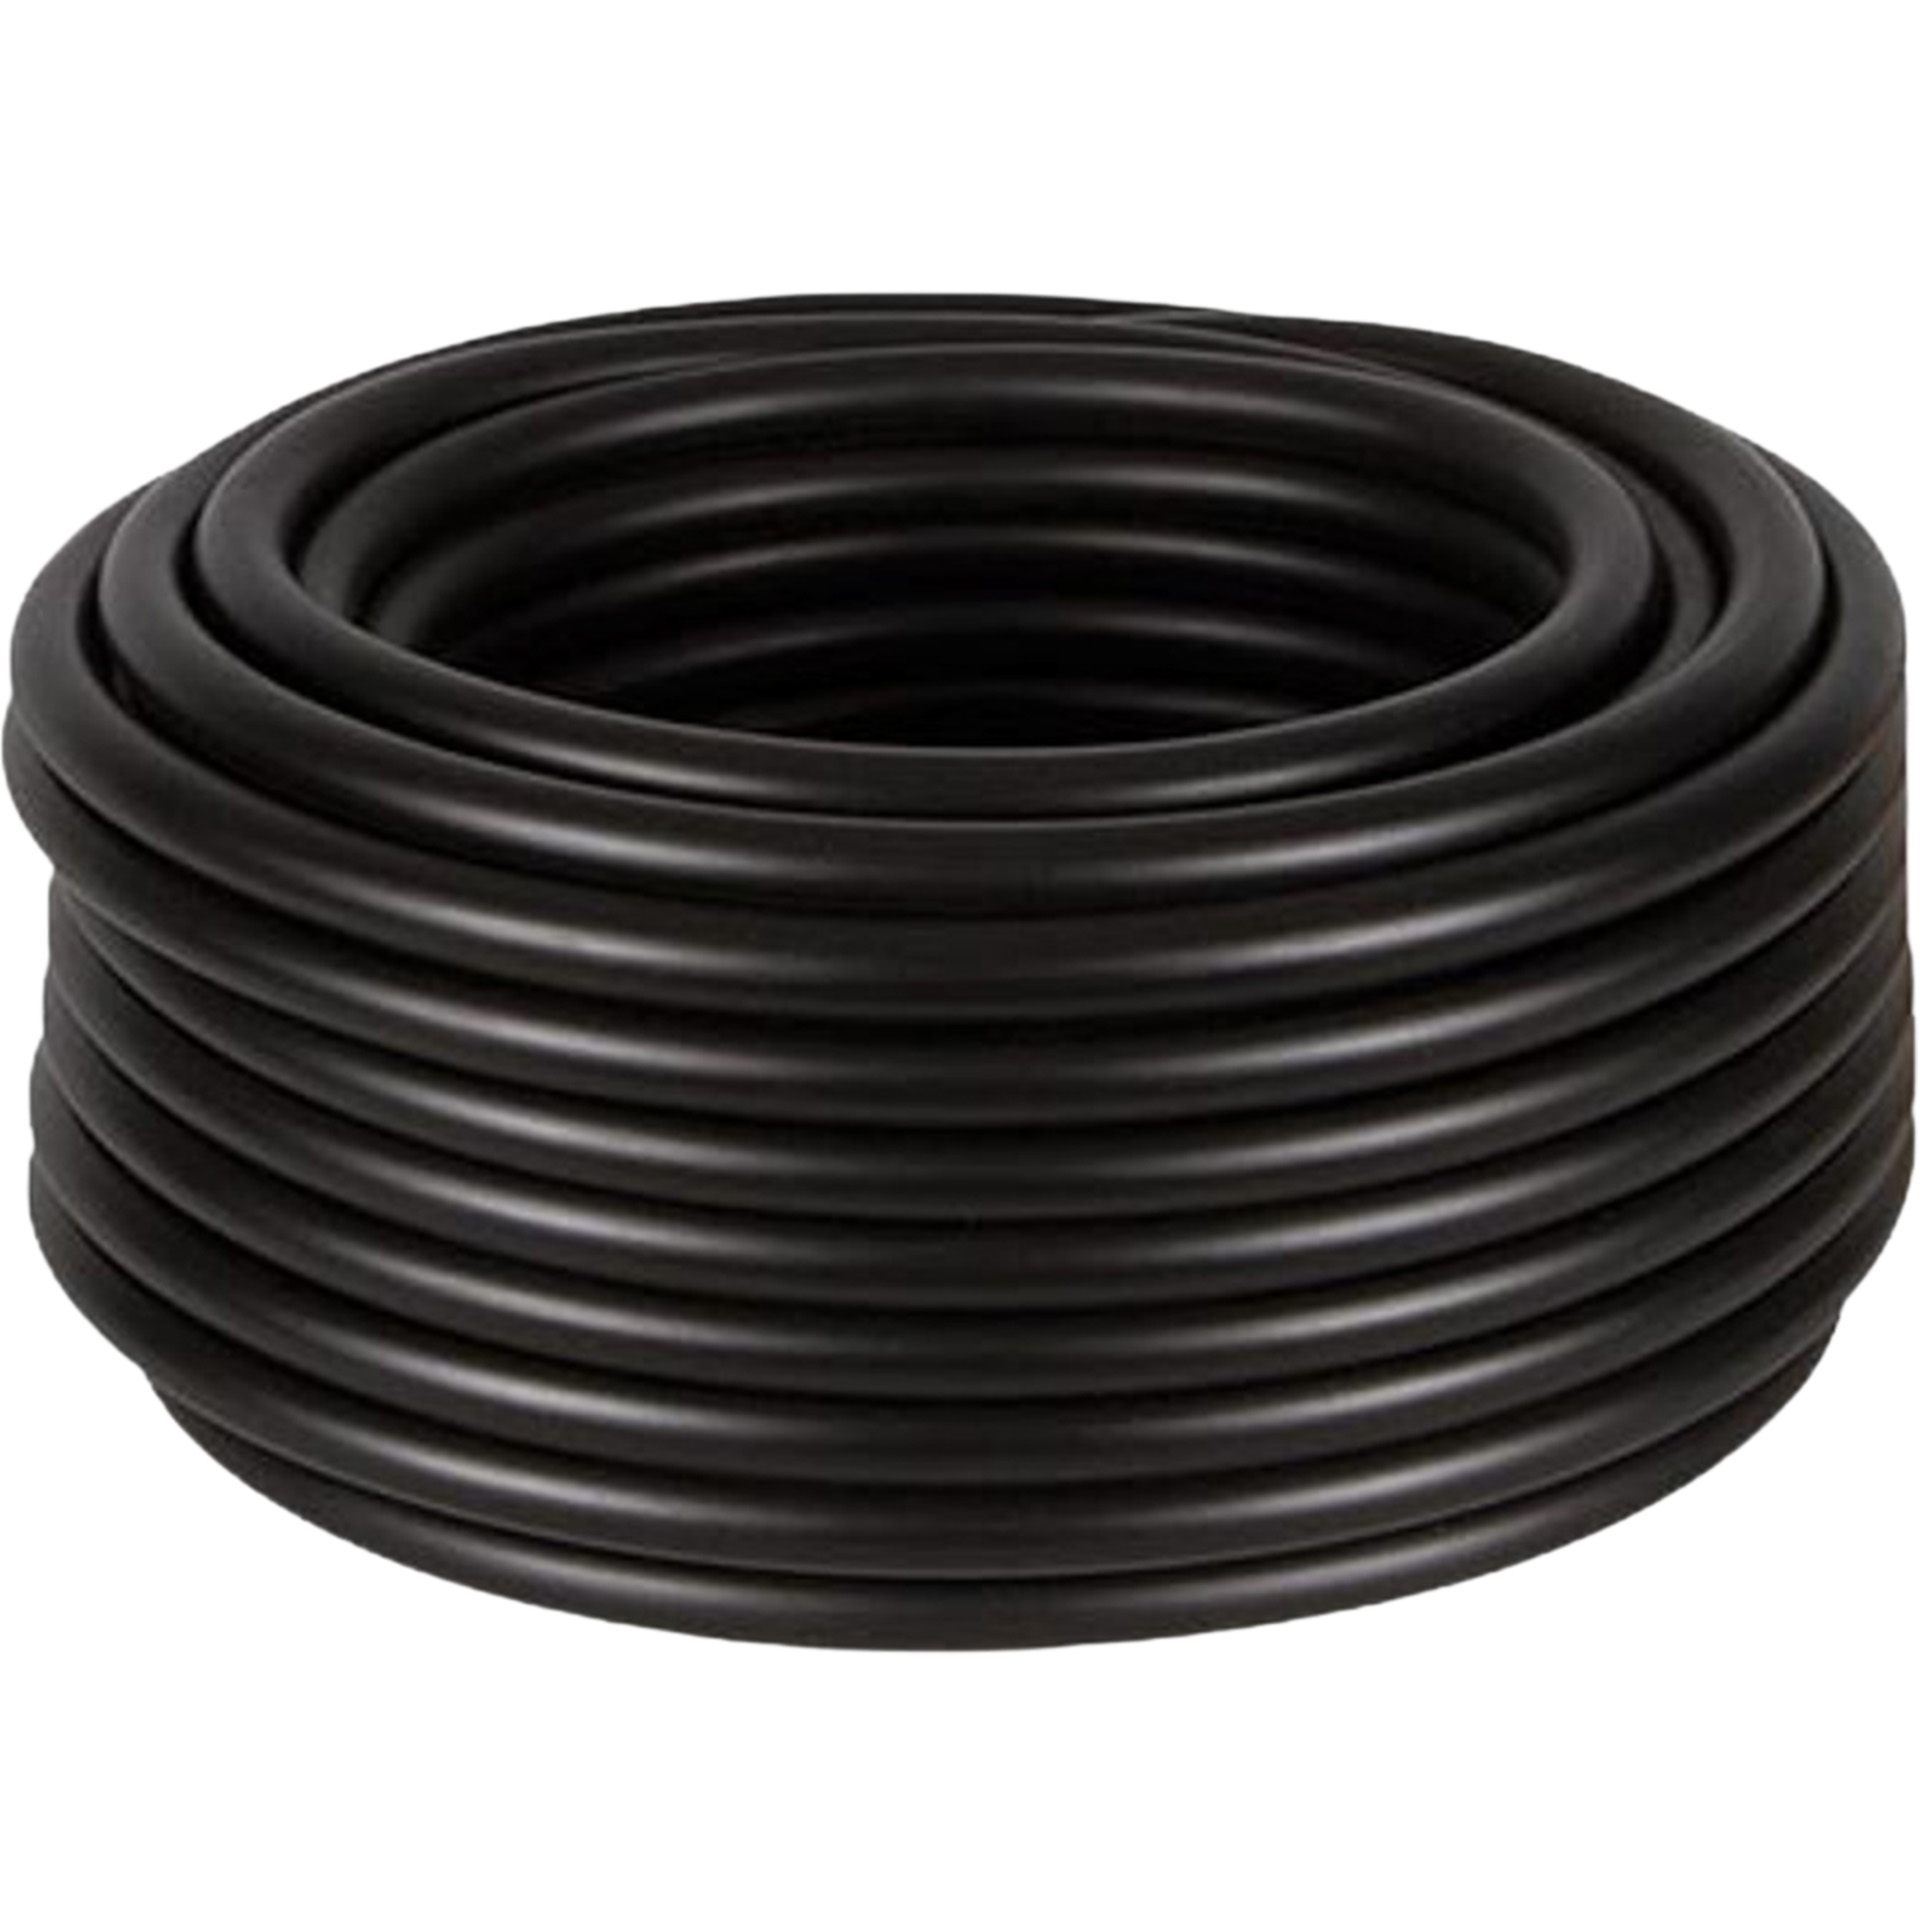 Pond Pro 3/8" Sinking Airline tubing